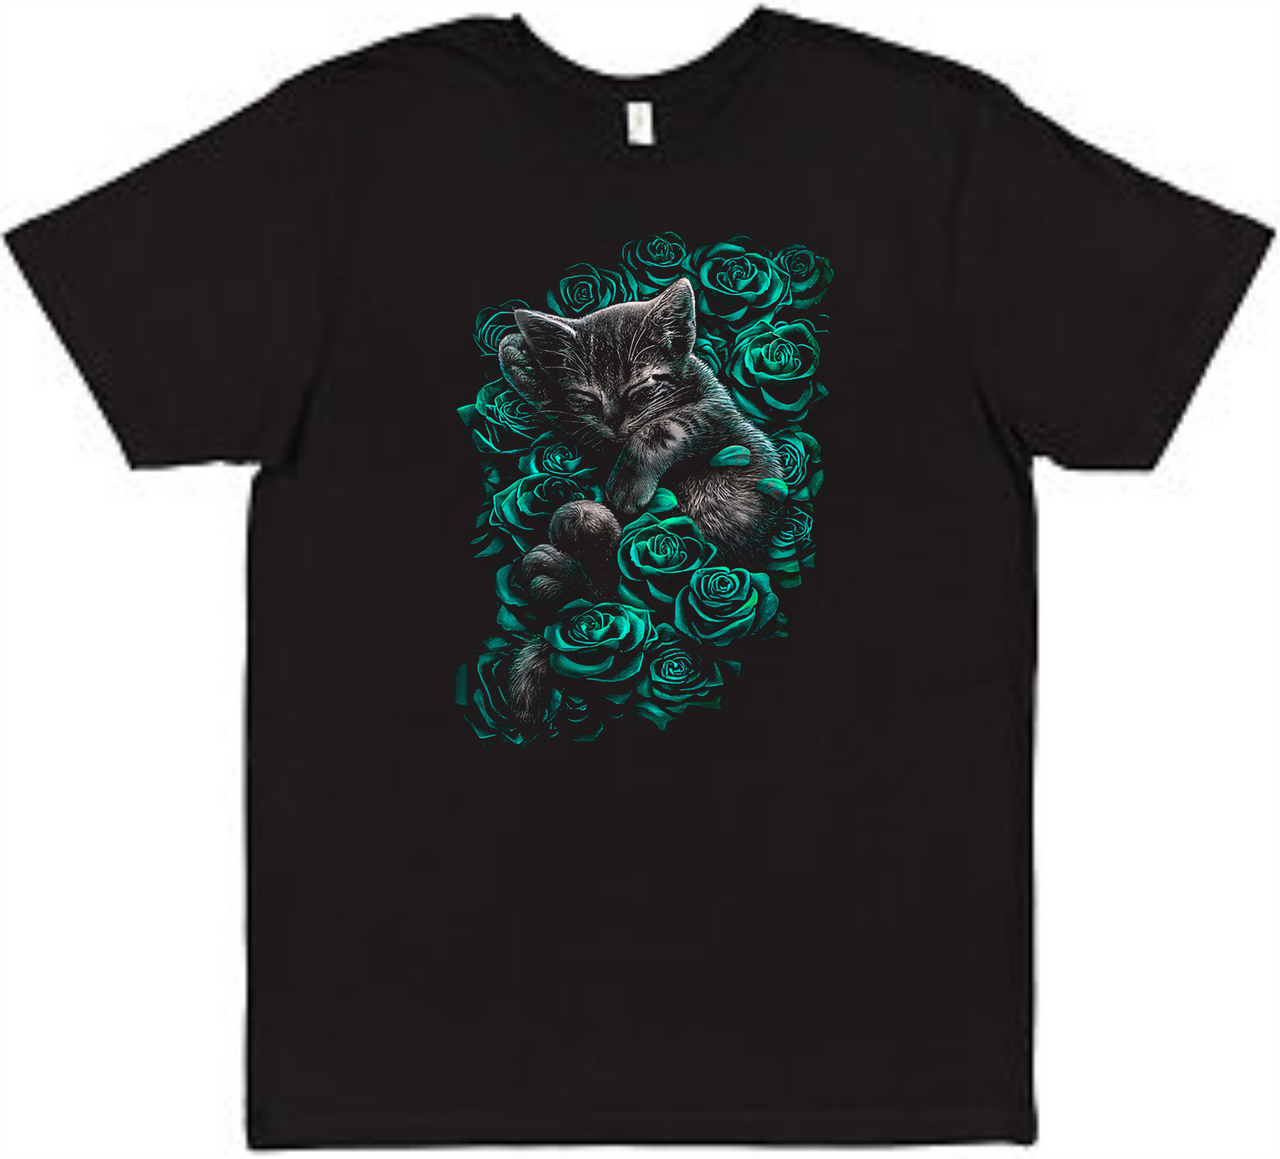 Kitty and Roses Tee Adult Shirt by Akron Pride Custom Tees | Akron Pride Custom Tees